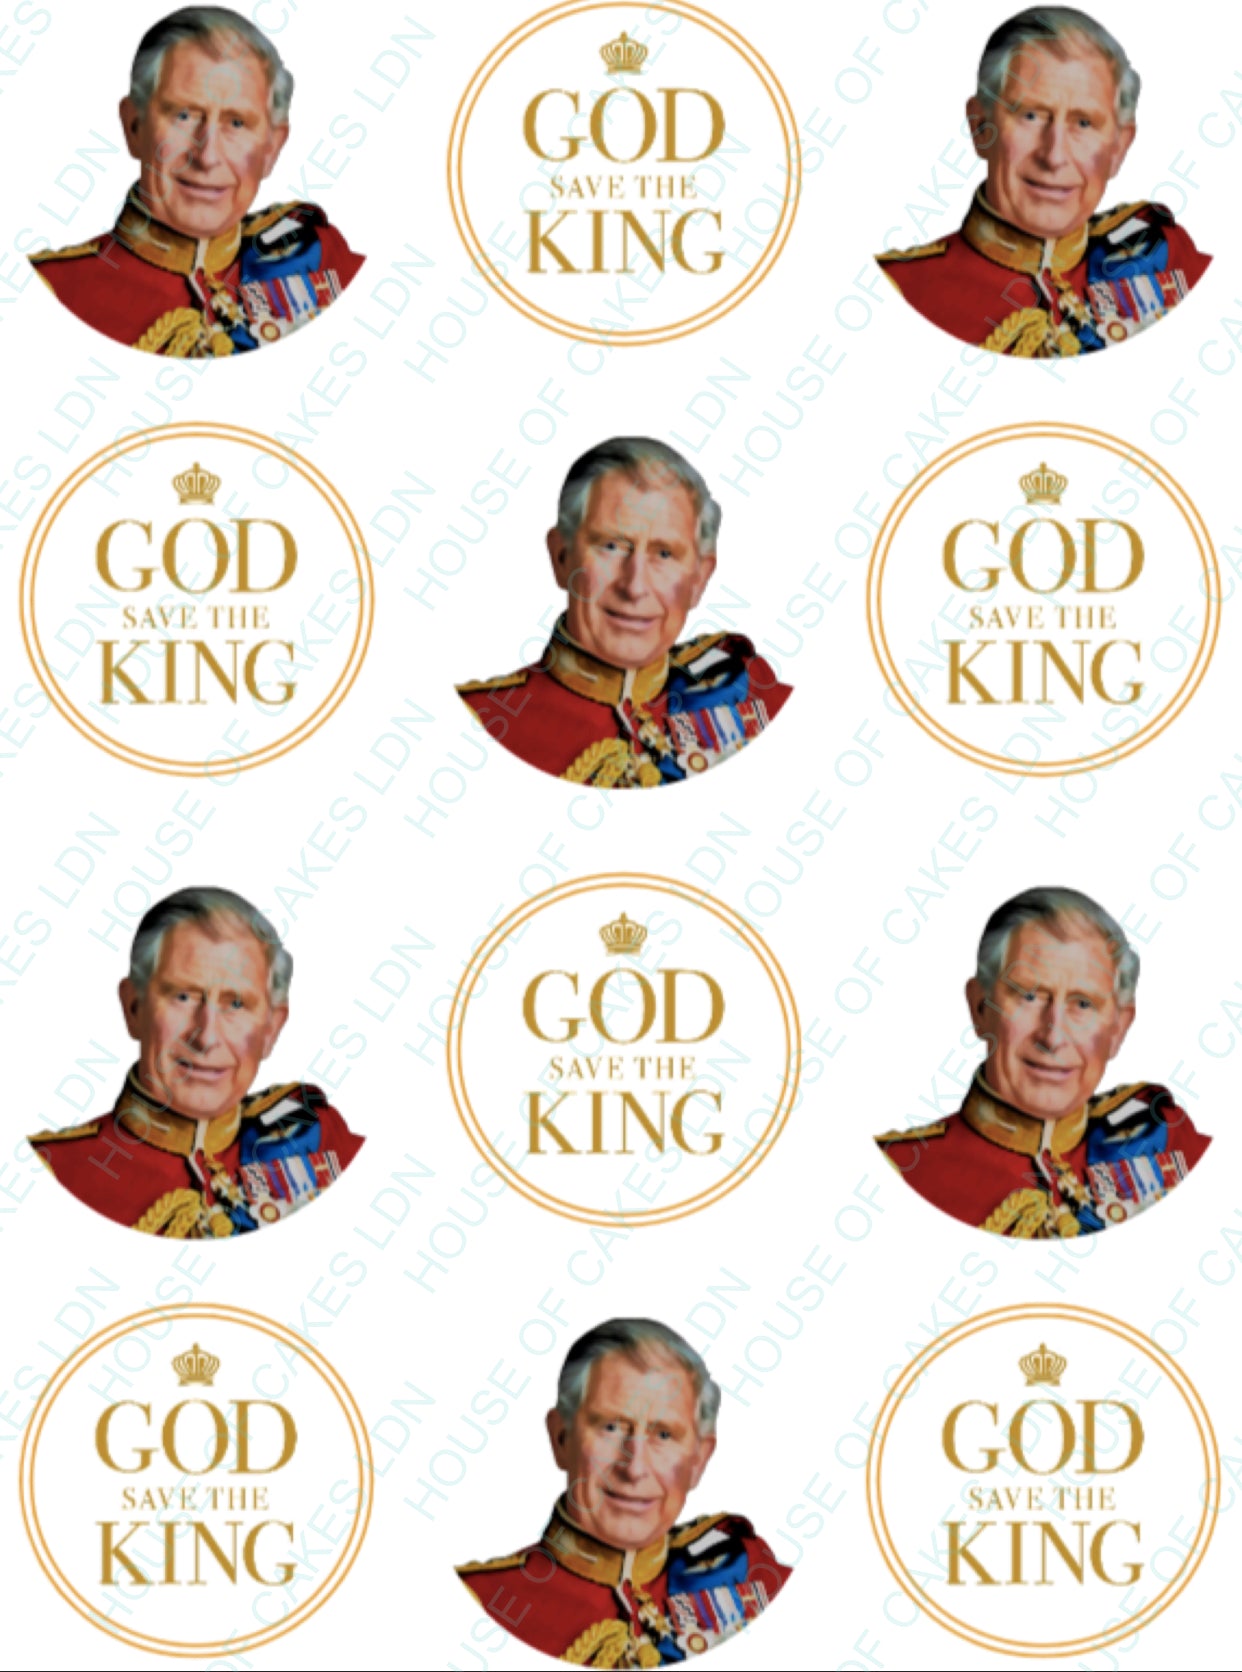 12x King Charles Coronation x God Save The King 5cm Pre-Cut EDIBLE Icing Cupcake Toppers Celebration Cake Decorations